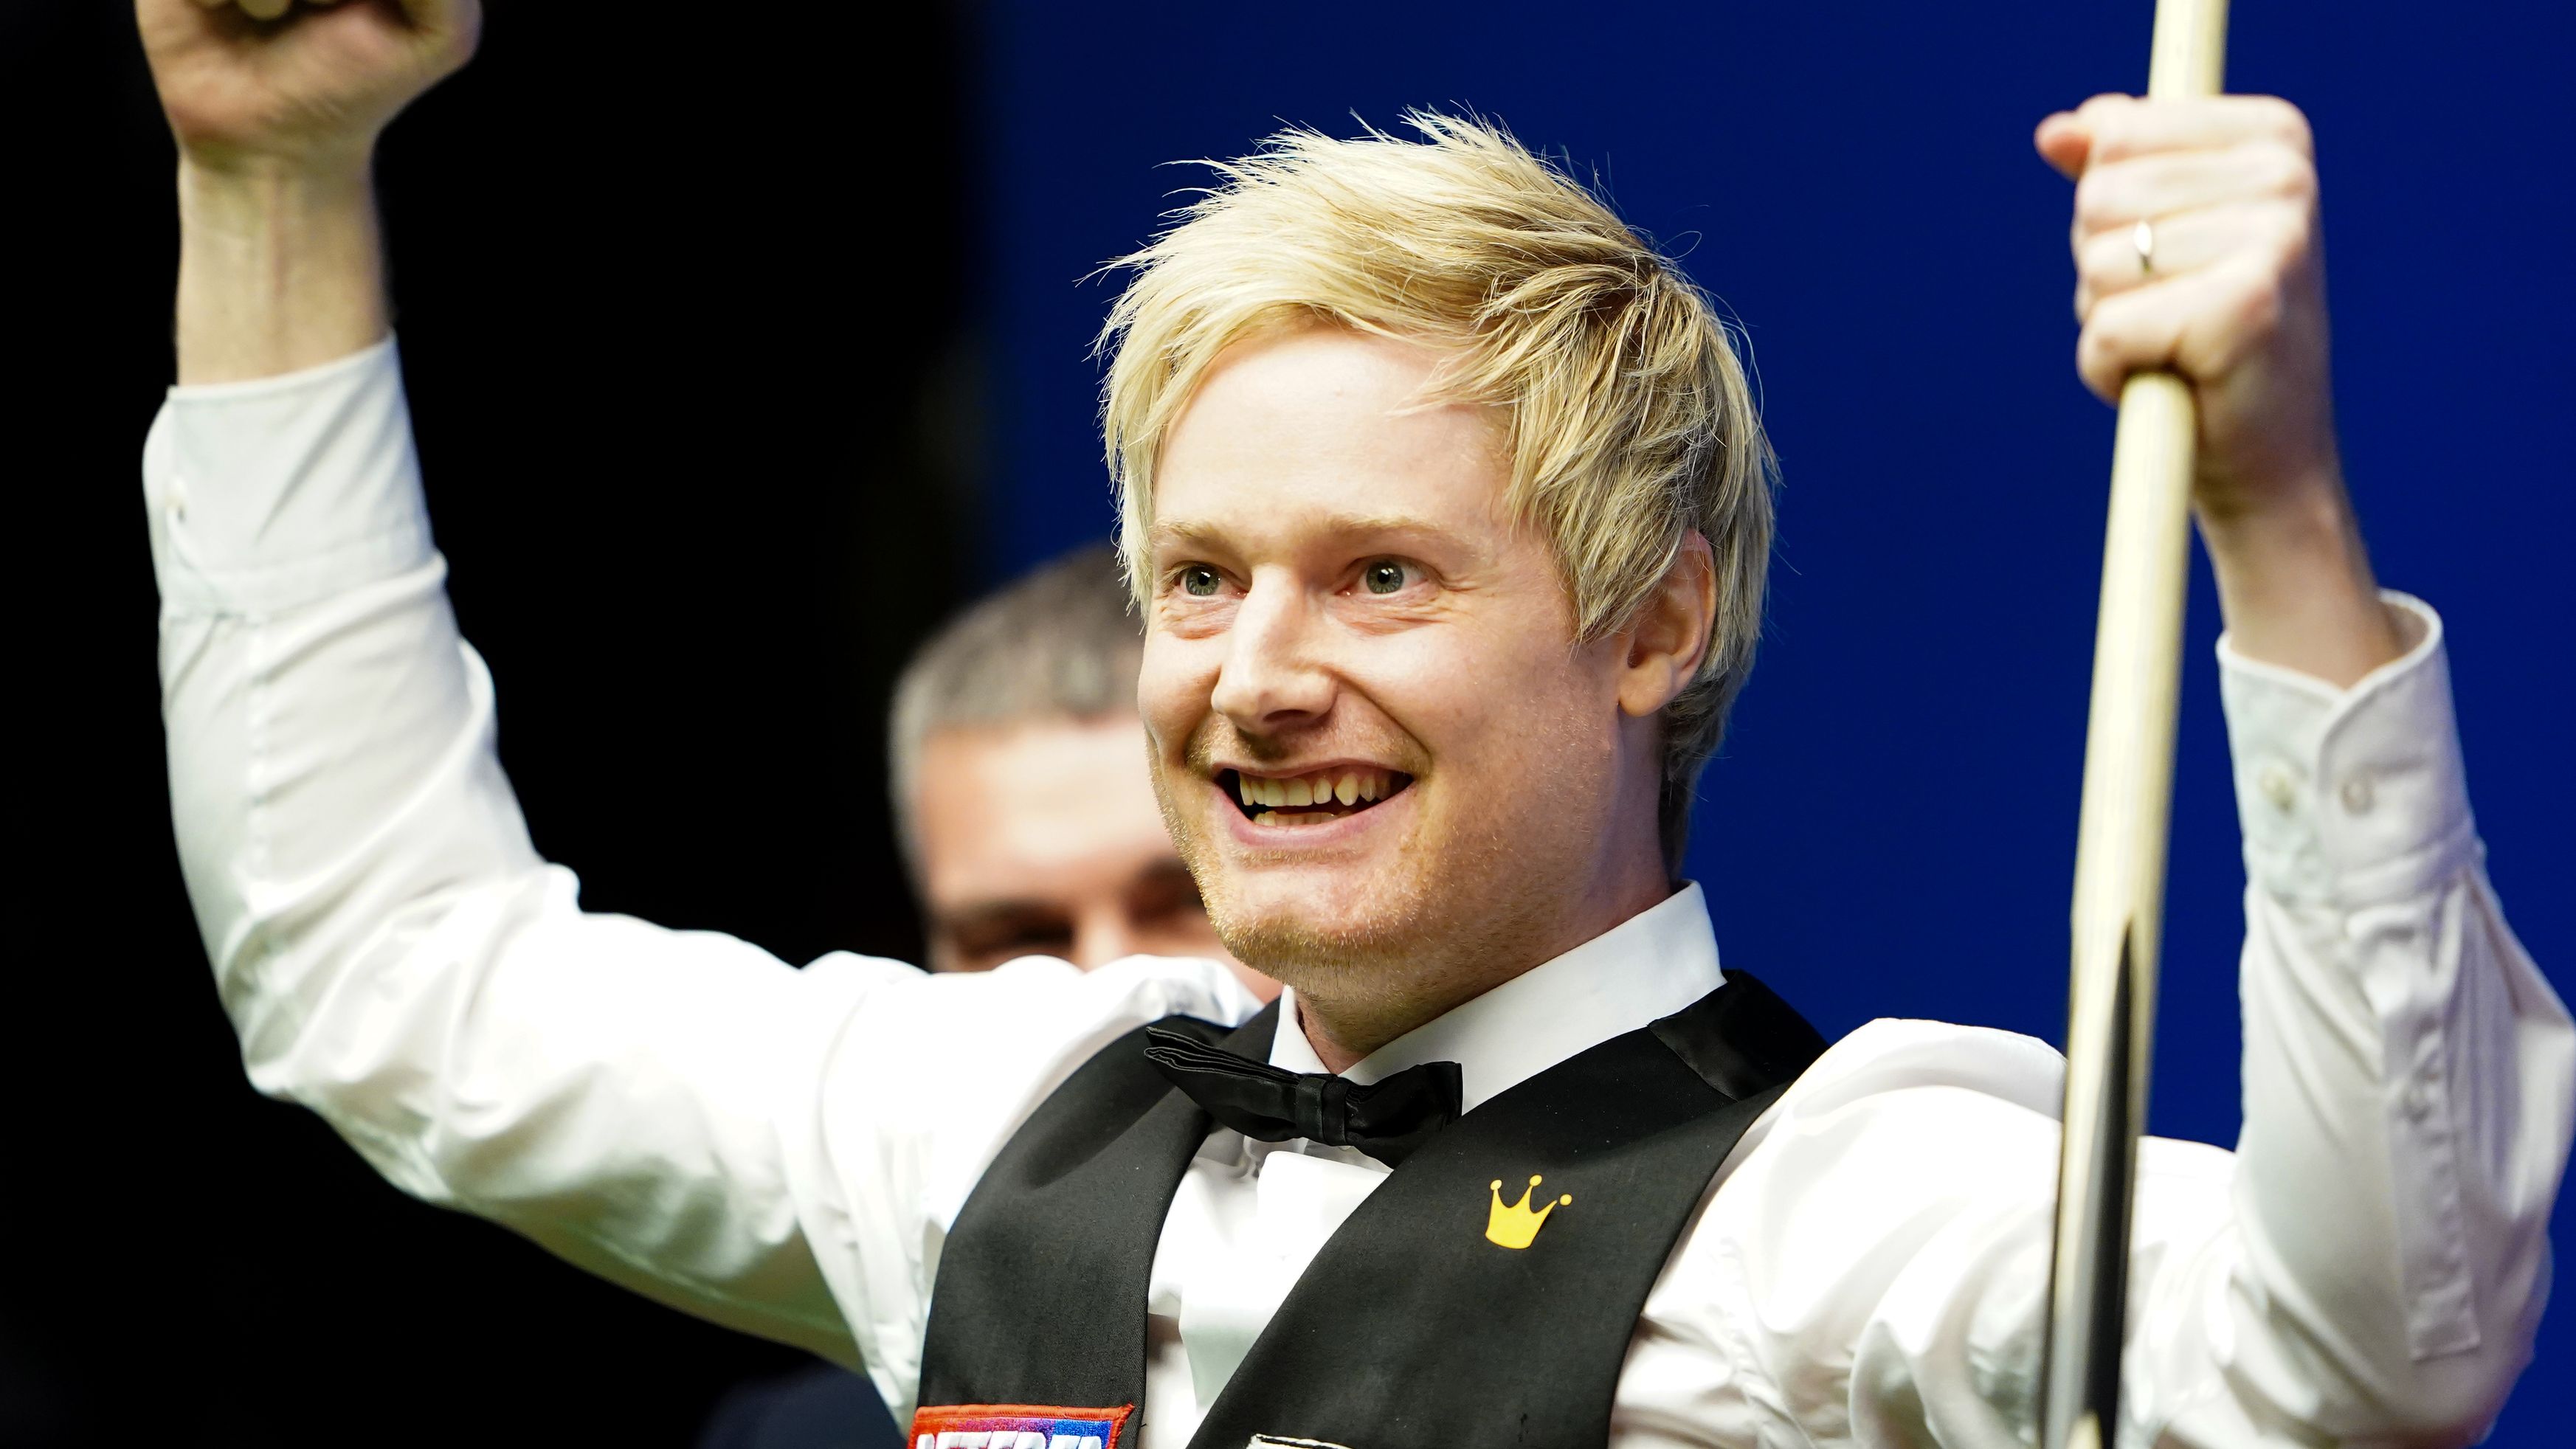 Australia&#x27;s Neil Robertson celebrates making a 147 against England&#x27;s Jack Lisowski during day 10 of the World Snooker Championships at The Crucible, Sheffield.